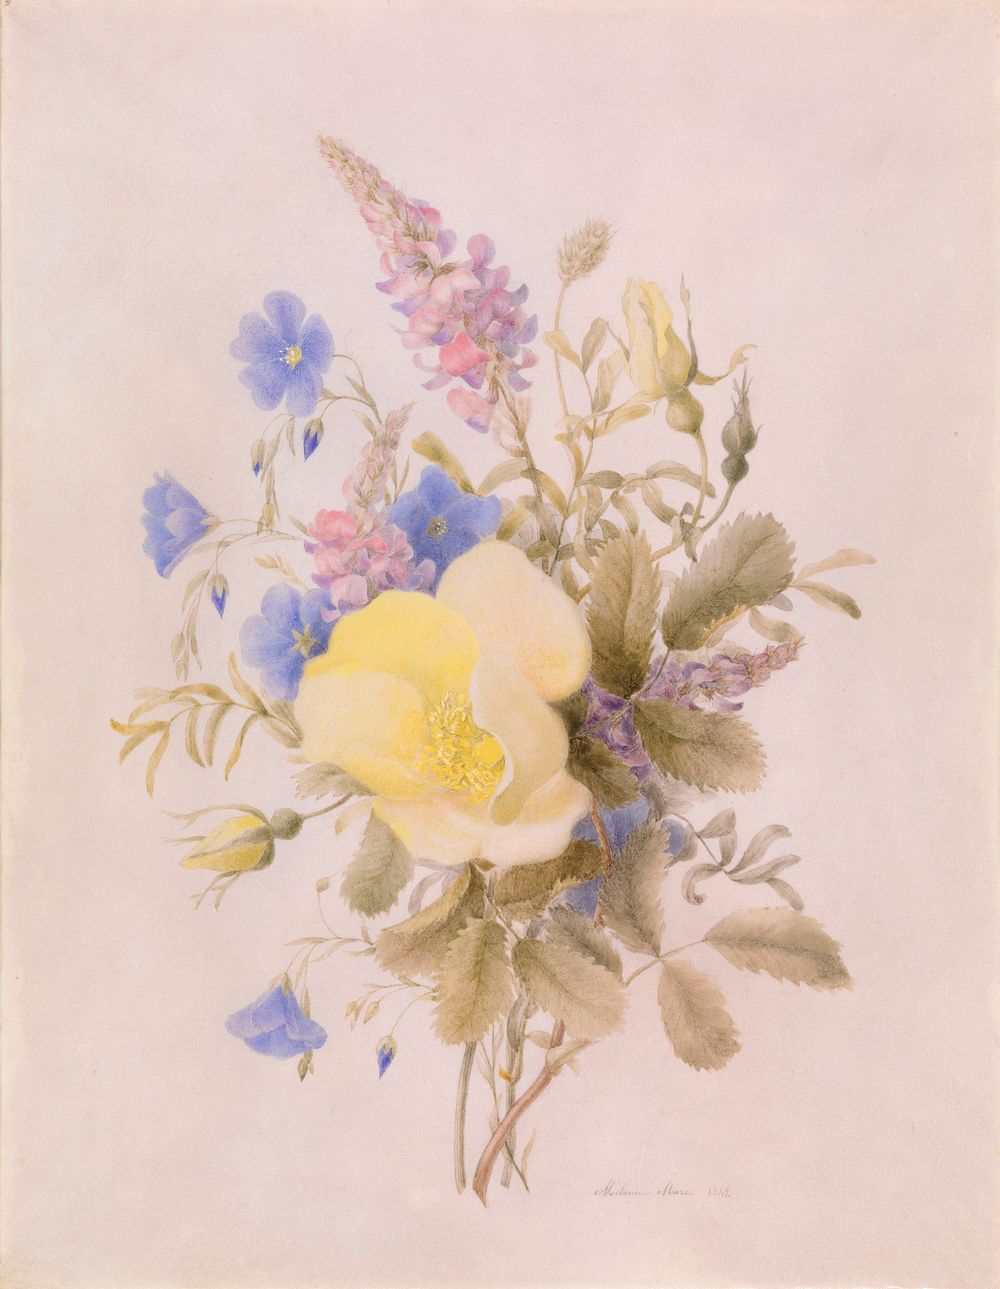 Flowers with Yellow Rose by Unidentified artist